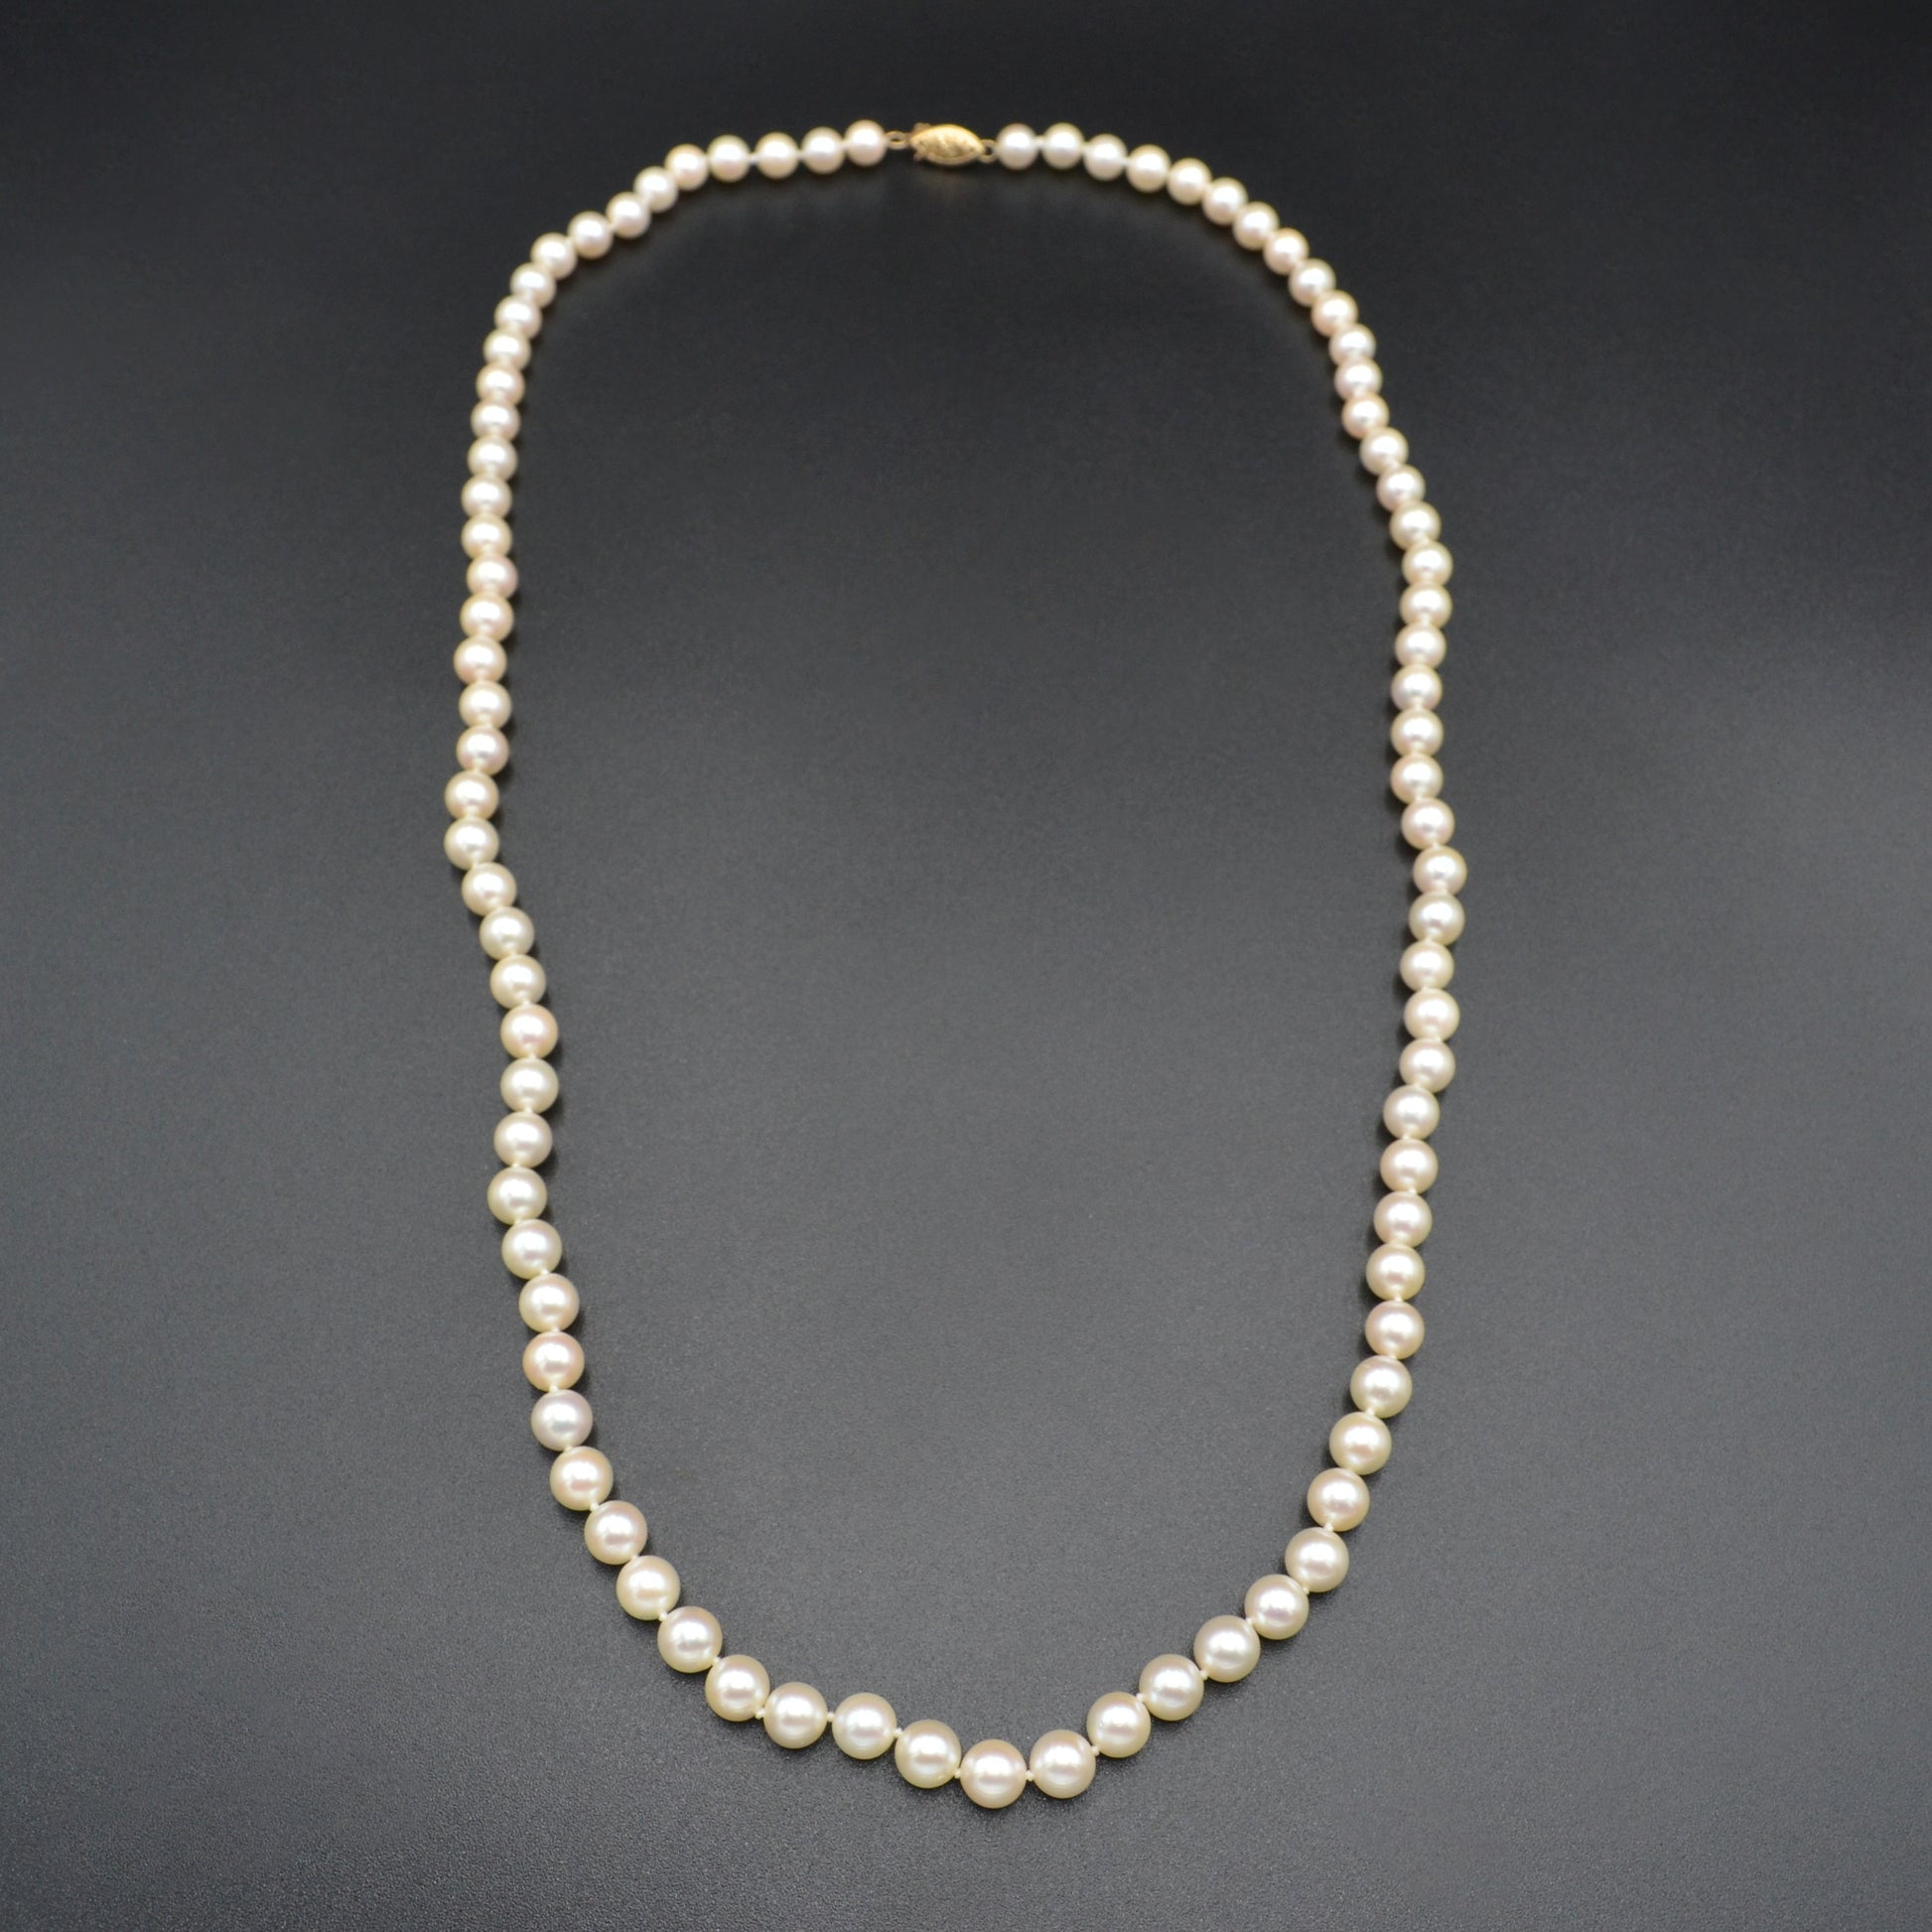 Vintage Matinee Length 14k Gold and Cultured Freshwater Pearl Necklace